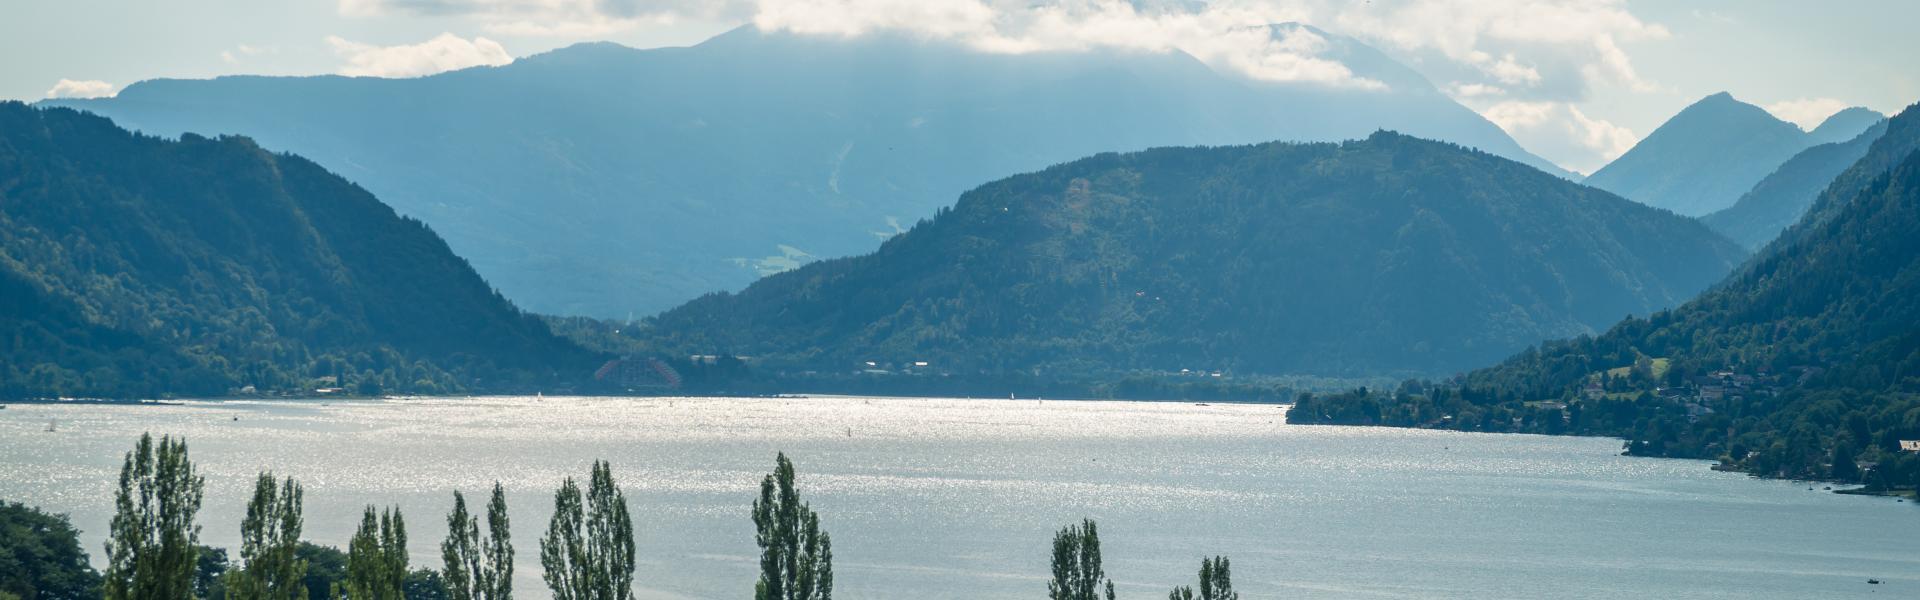 Lake Ossiach is situated in the southern Nock Mountains range of the Gurktal Alps along the road from Villach to Feldkirchen, at a height of 501 m (1,644 ft) AA.